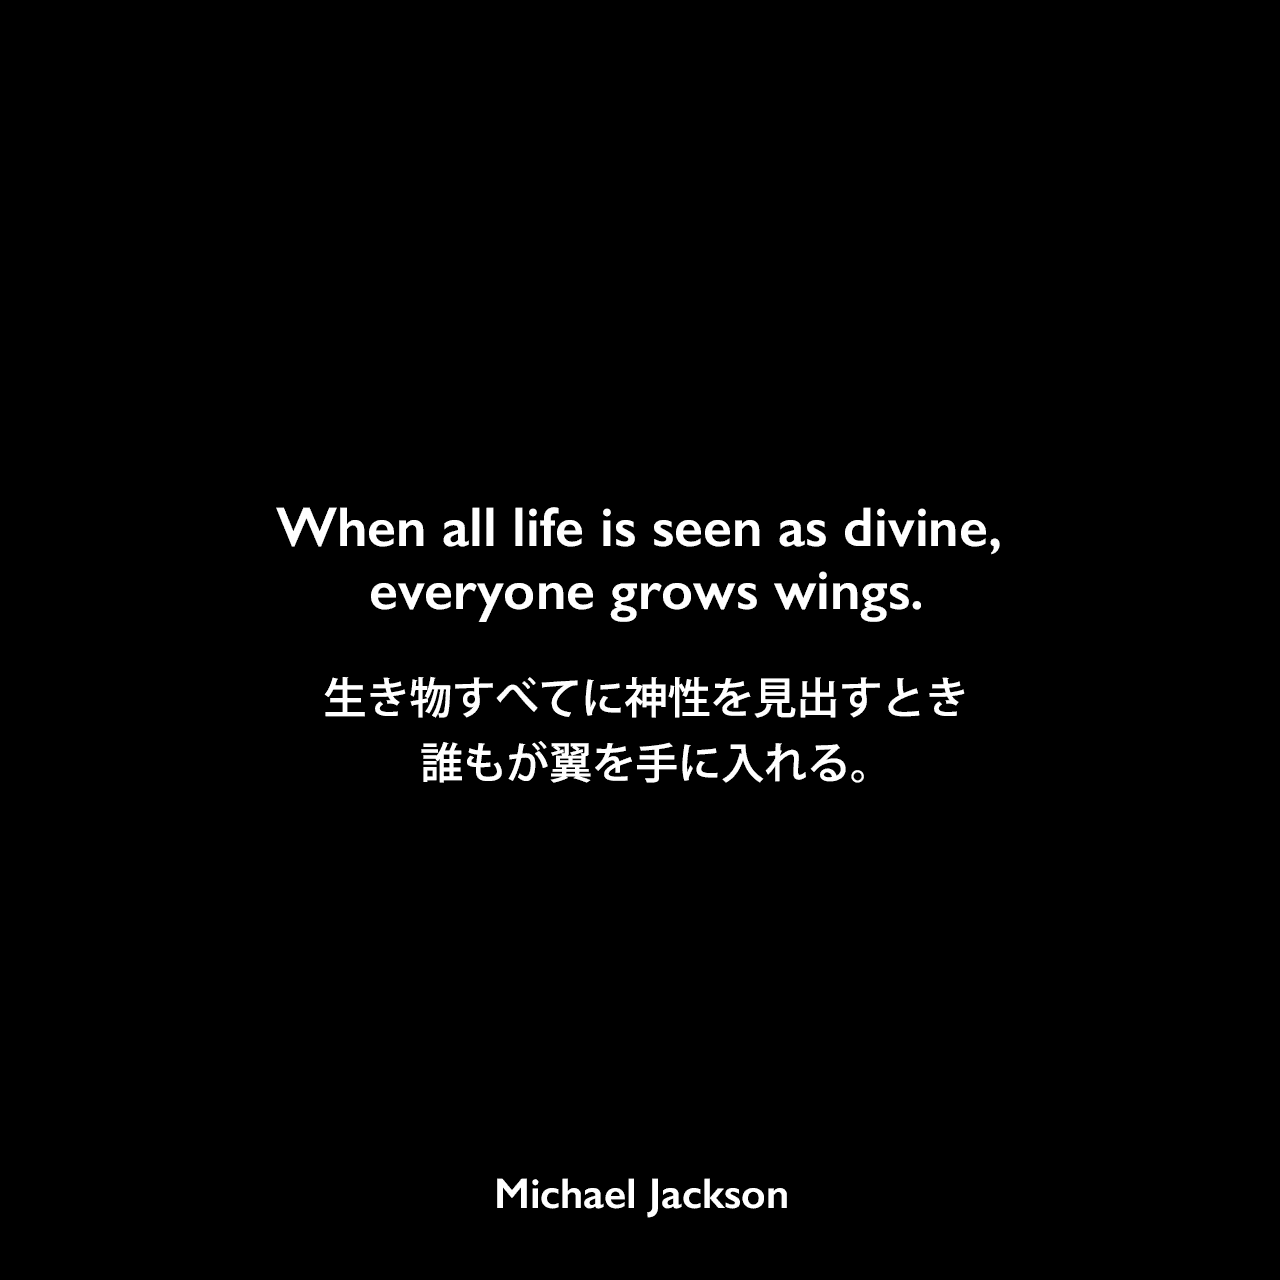 When all life is seen as divine, everyone grows wings.生き物すべてに神性を見出すとき、誰もが翼を手に入れる。Michael Jackson